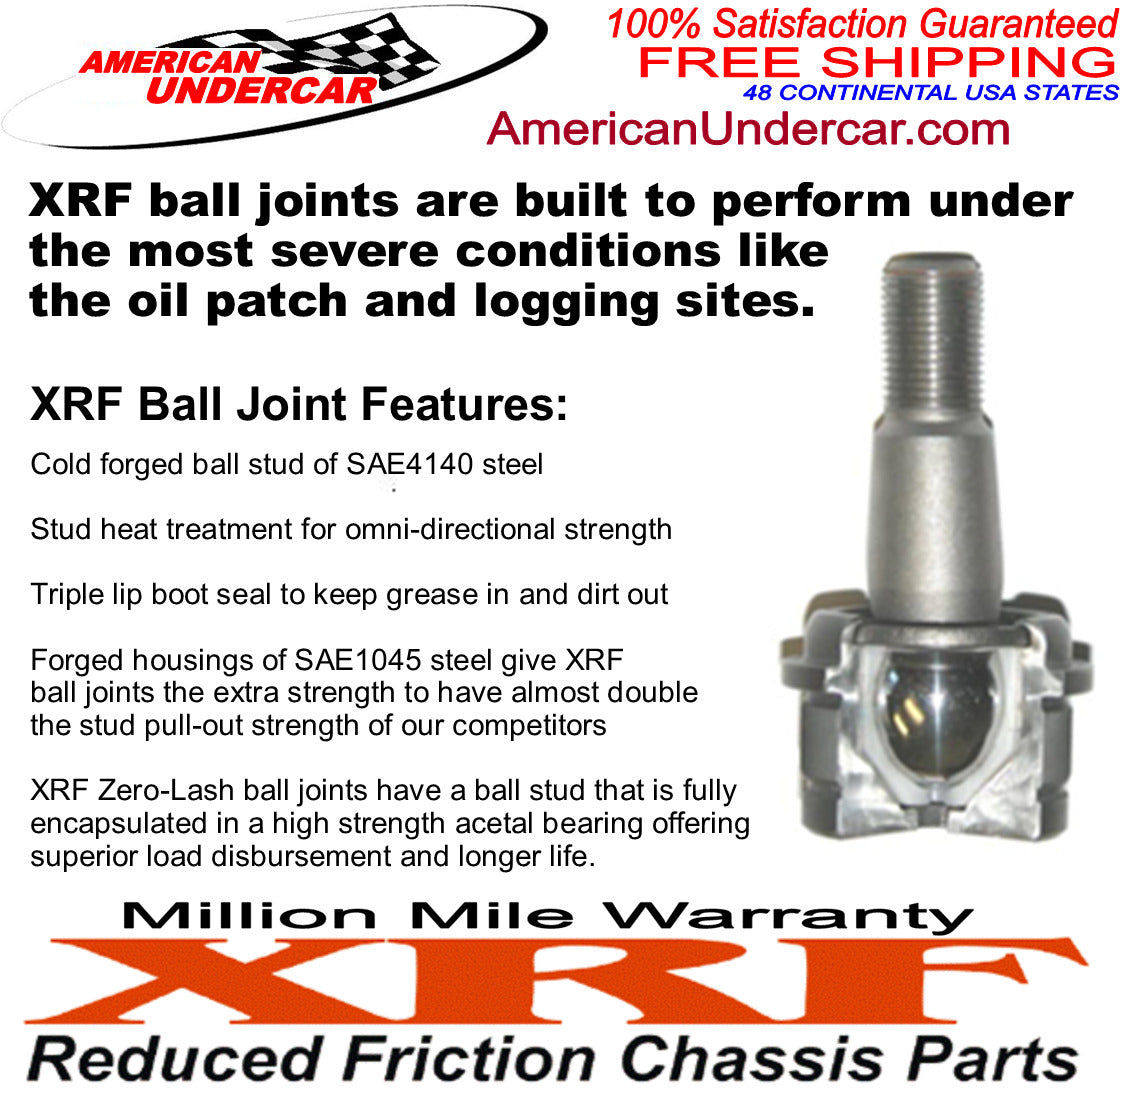 XRF Ford F450 Super Duty Ball Joint Steering and Suspension Kit 2005 - 2010 4x4